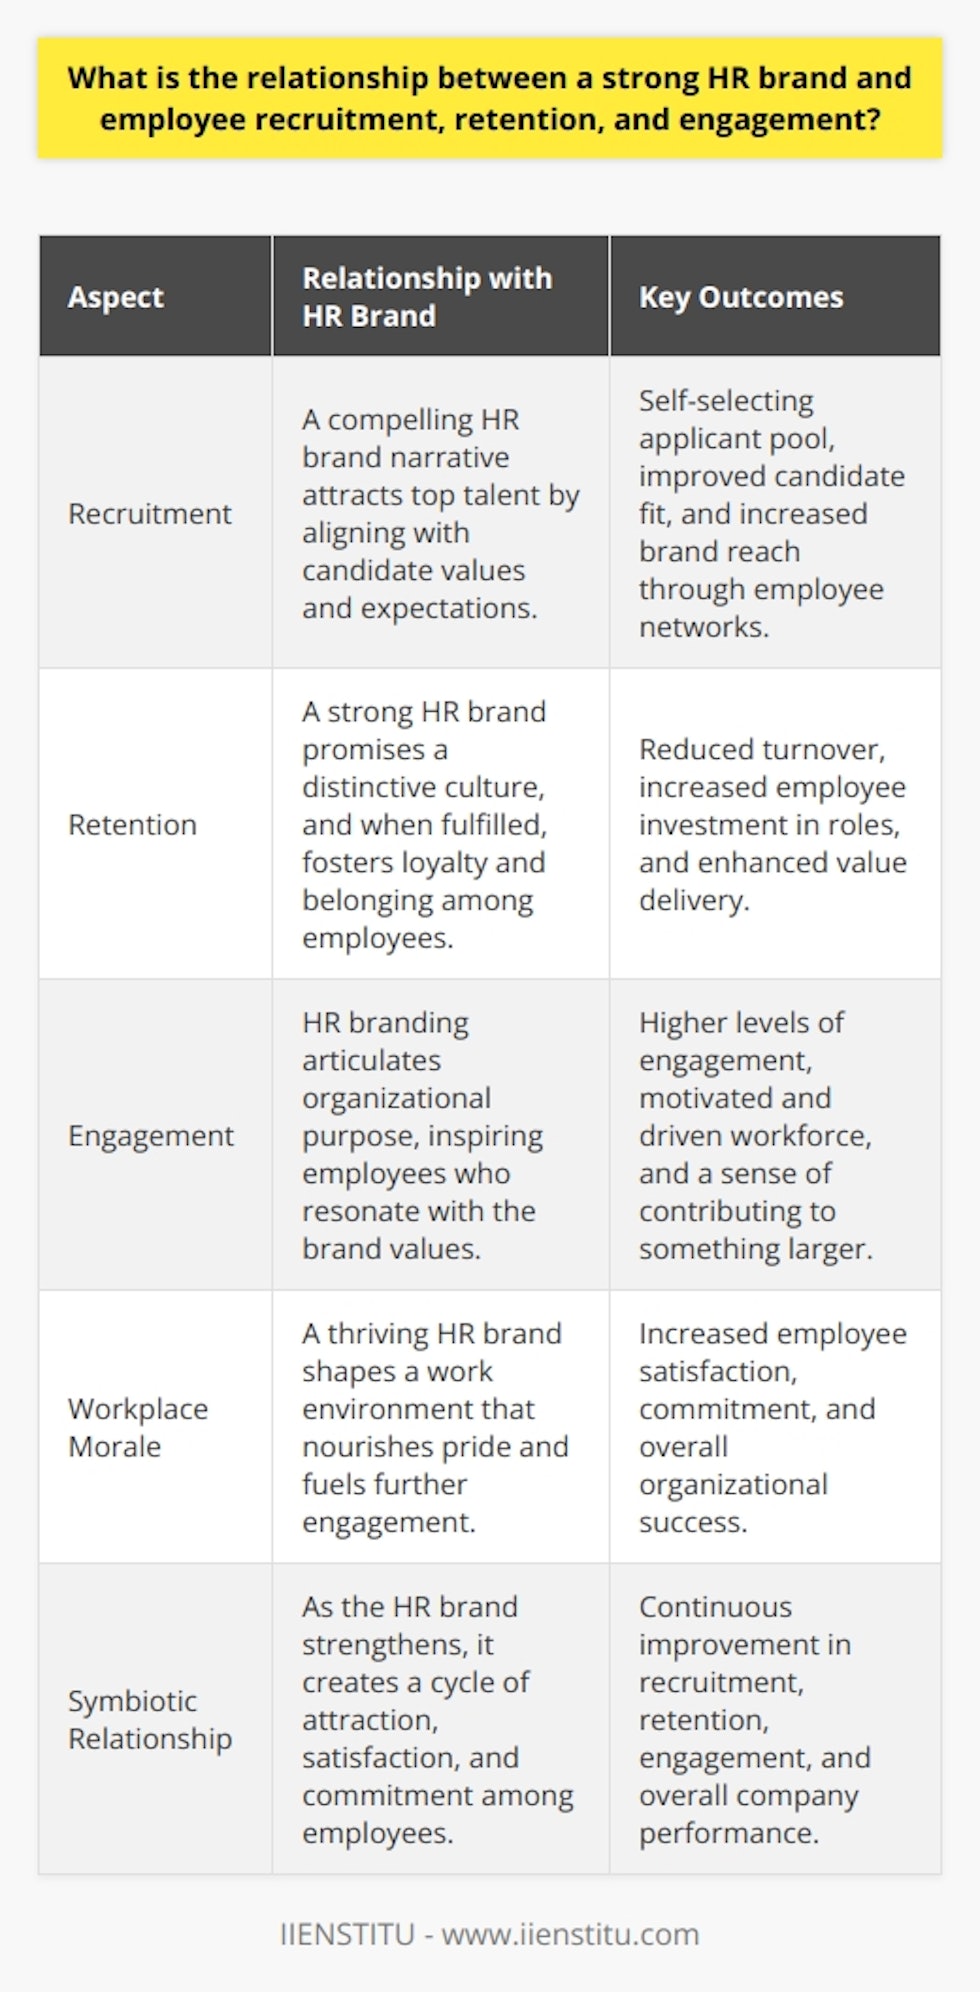 The Intersection of HR Brand and Recruitment A strong HR brand streamlines recruitment. It does so by creating a compelling narrative about the employer. Candidates seek employers with clear, engaging employer brands. This attractiveness simplifies the hunt for top talent. It makes the potential employee pool self-selecting. Thus, the stronger the HR brand, the better the fit of applicants. Boldly stated , an effective HR brand is a magnet. It draws applicants that align with the company values. Those individuals often become enthusiastic ambassadors. They extend the brands reach through their networks. In sum, a well-honed HR brand attracts quality talent efficiently. Employee Retention and HR Brand Strength Retention hinges on the employee experience. A robust HR brand promises a distinctive culture. Employees expect the actual workplace to reflect this promise. A fulfilled promise fosters loyalty. It breeds a sense of belonging. Staff may see fewer reasons to leave, reducing turnover. The brand acts as a binding contract. It upholds expectations on both sides. Satisfied expectations mean employees tend to stay longer. They invest in their roles, delivering enhanced value. Catalyzing Employee Engagement through HR Branding Engagement correlates with brand resonance. Employees embrace values they resonate with. A strong HR brand does not just inform. It also inspires. Inspiration leads to higher levels of engagement. Workers are more than mere cogs in the machine. They yearn for purpose. HR branding can articulate this purpose vividly. It thus fosters a motivated and driven workforce. The Symbiosis of HR Brand and Workplace Morale A thriving HR brand boosts morale. It shapes a work environment that nourishes pride. Employees pride in their work fuels further engagement. They are not merely working; they are contributing to something larger. Conclusively , a reliable HR brand intertwines with recruitment, retention, and engagement. It acts as a beacon. This beacon illuminates the employers unique value proposition. It becomes instrumental in drawing, holding, and stimulating employees. As the HR brand strengthens, the company reaps the benefits. These benefits manifest in a cycle of attraction, satisfaction, and commitment. The process continuously feeds back into the overarching success of the organization.